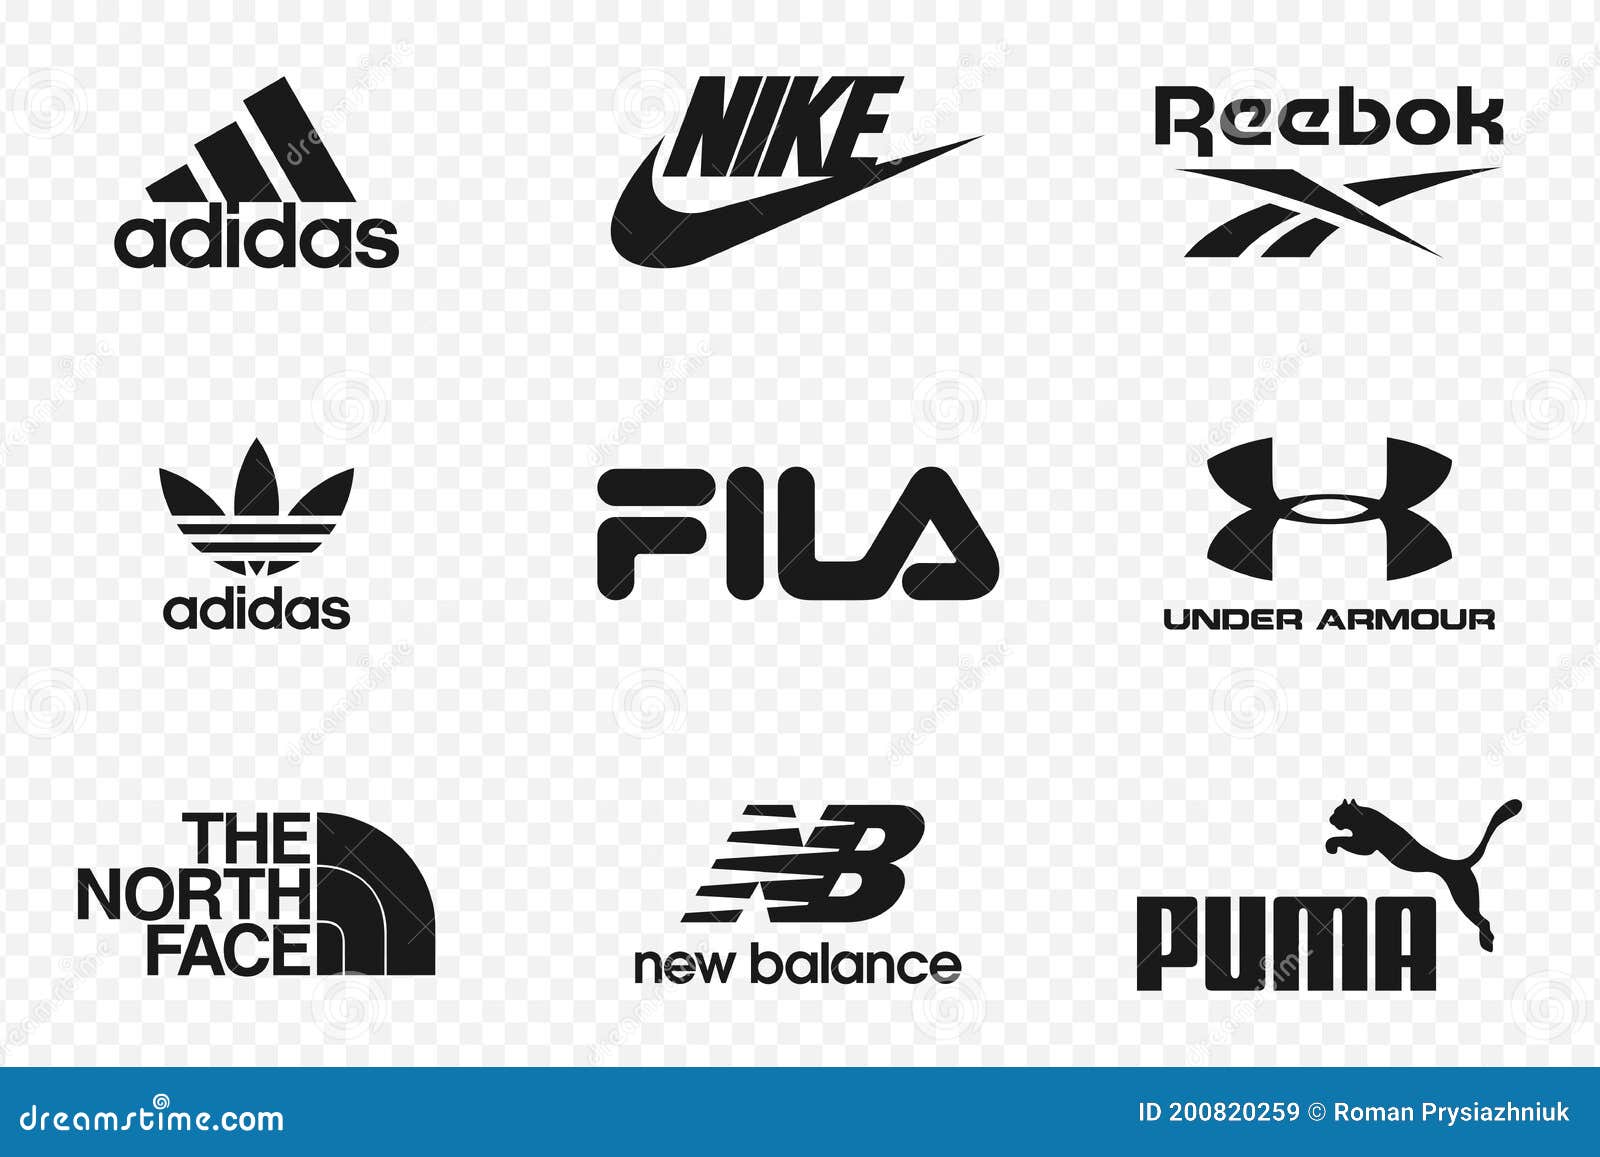 nike brands and subsidiaries